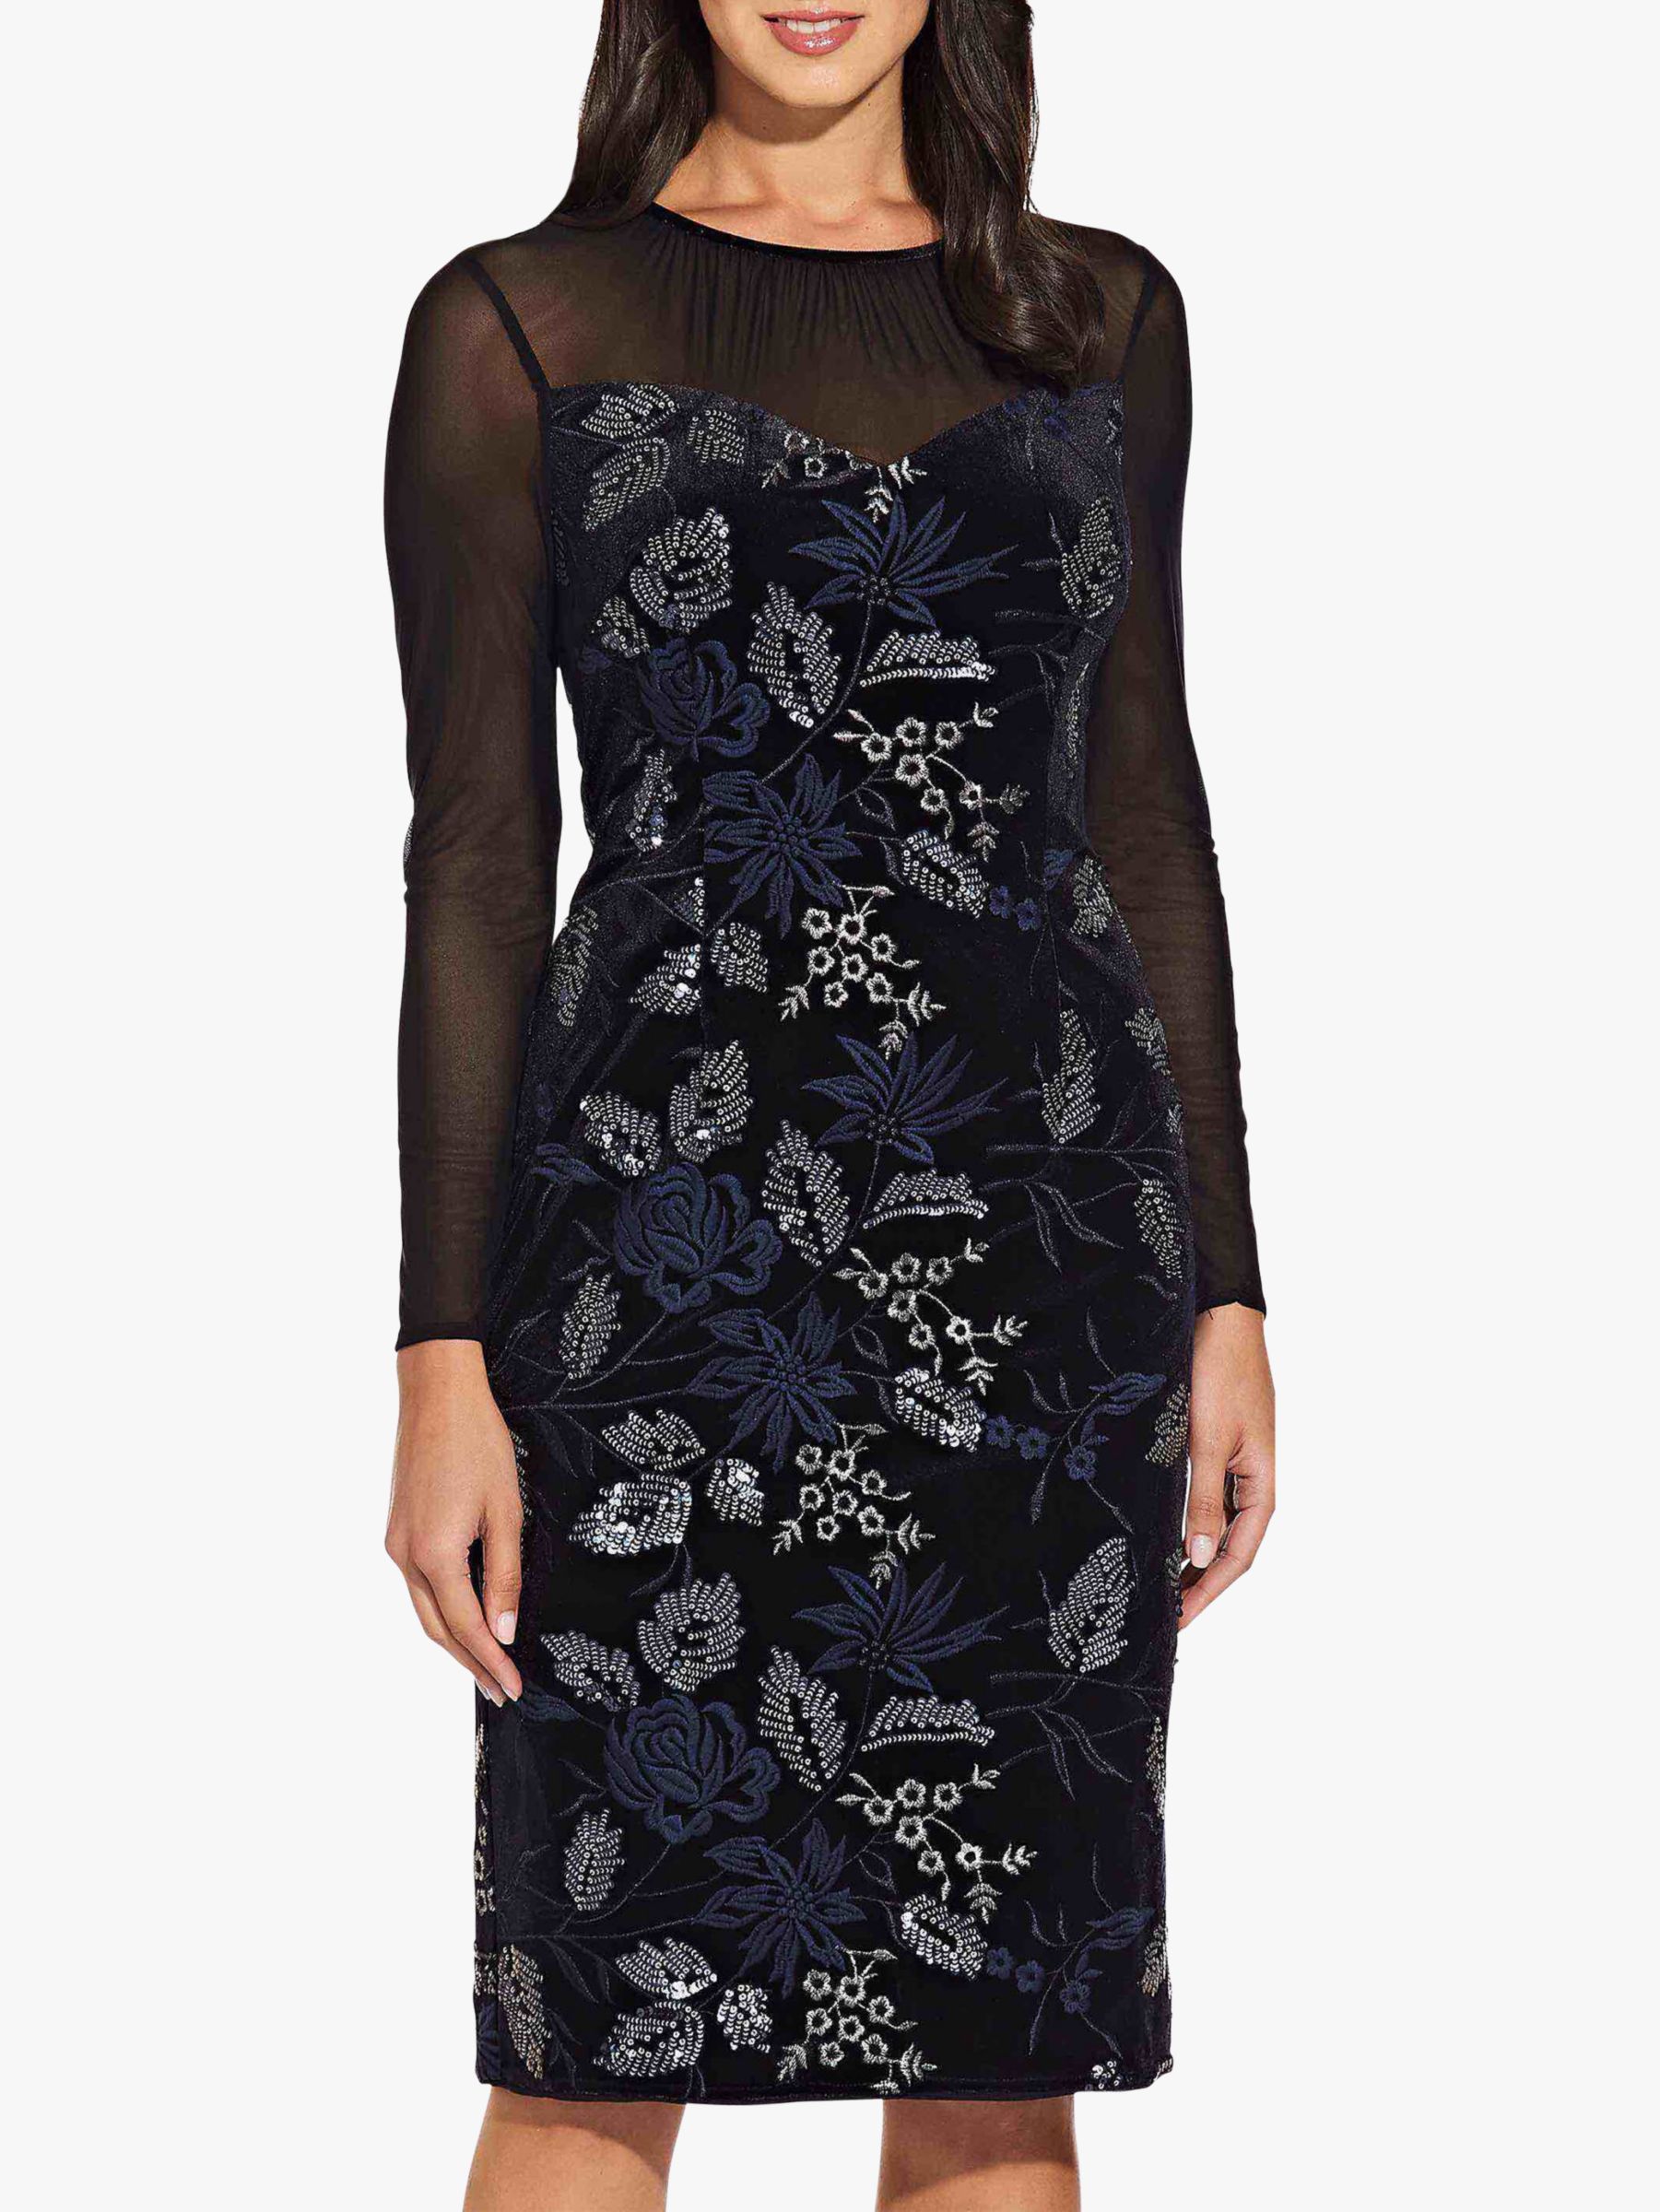 Adrianna Papell Natalia Floral Lace Dress, Black/Navy